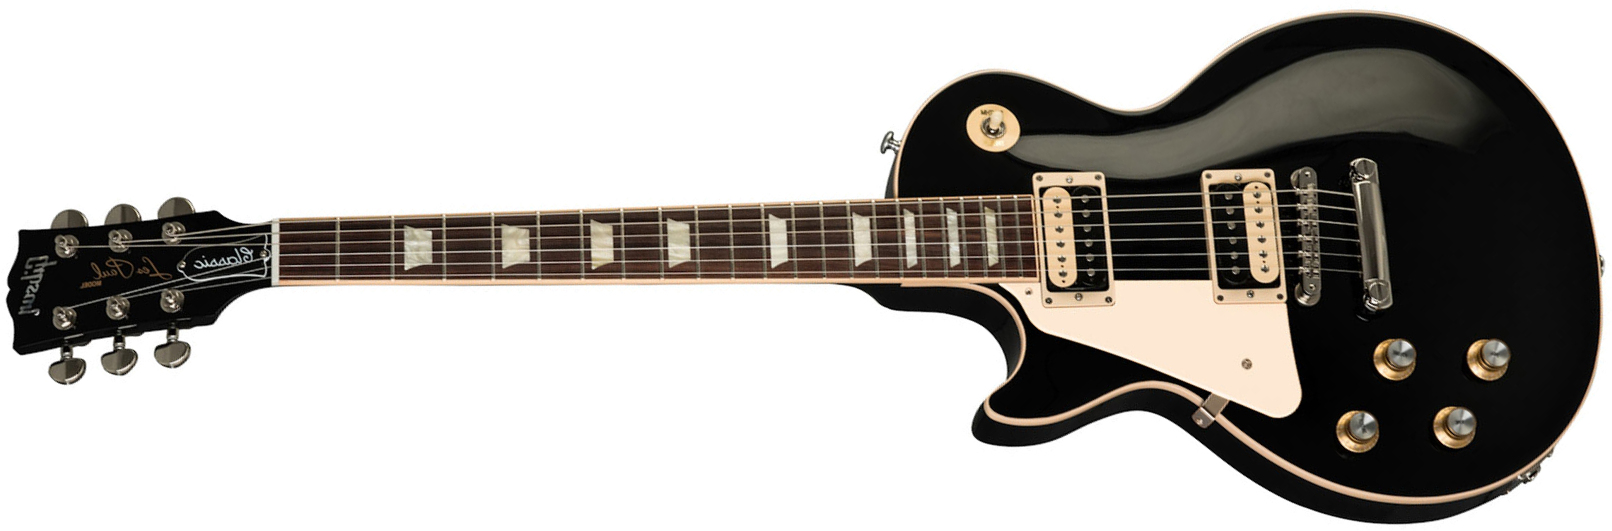 Gibson Les Paul Classic Modern Gaucher 2h Ht Rw - Ebony - Left-handed electric guitar - Main picture